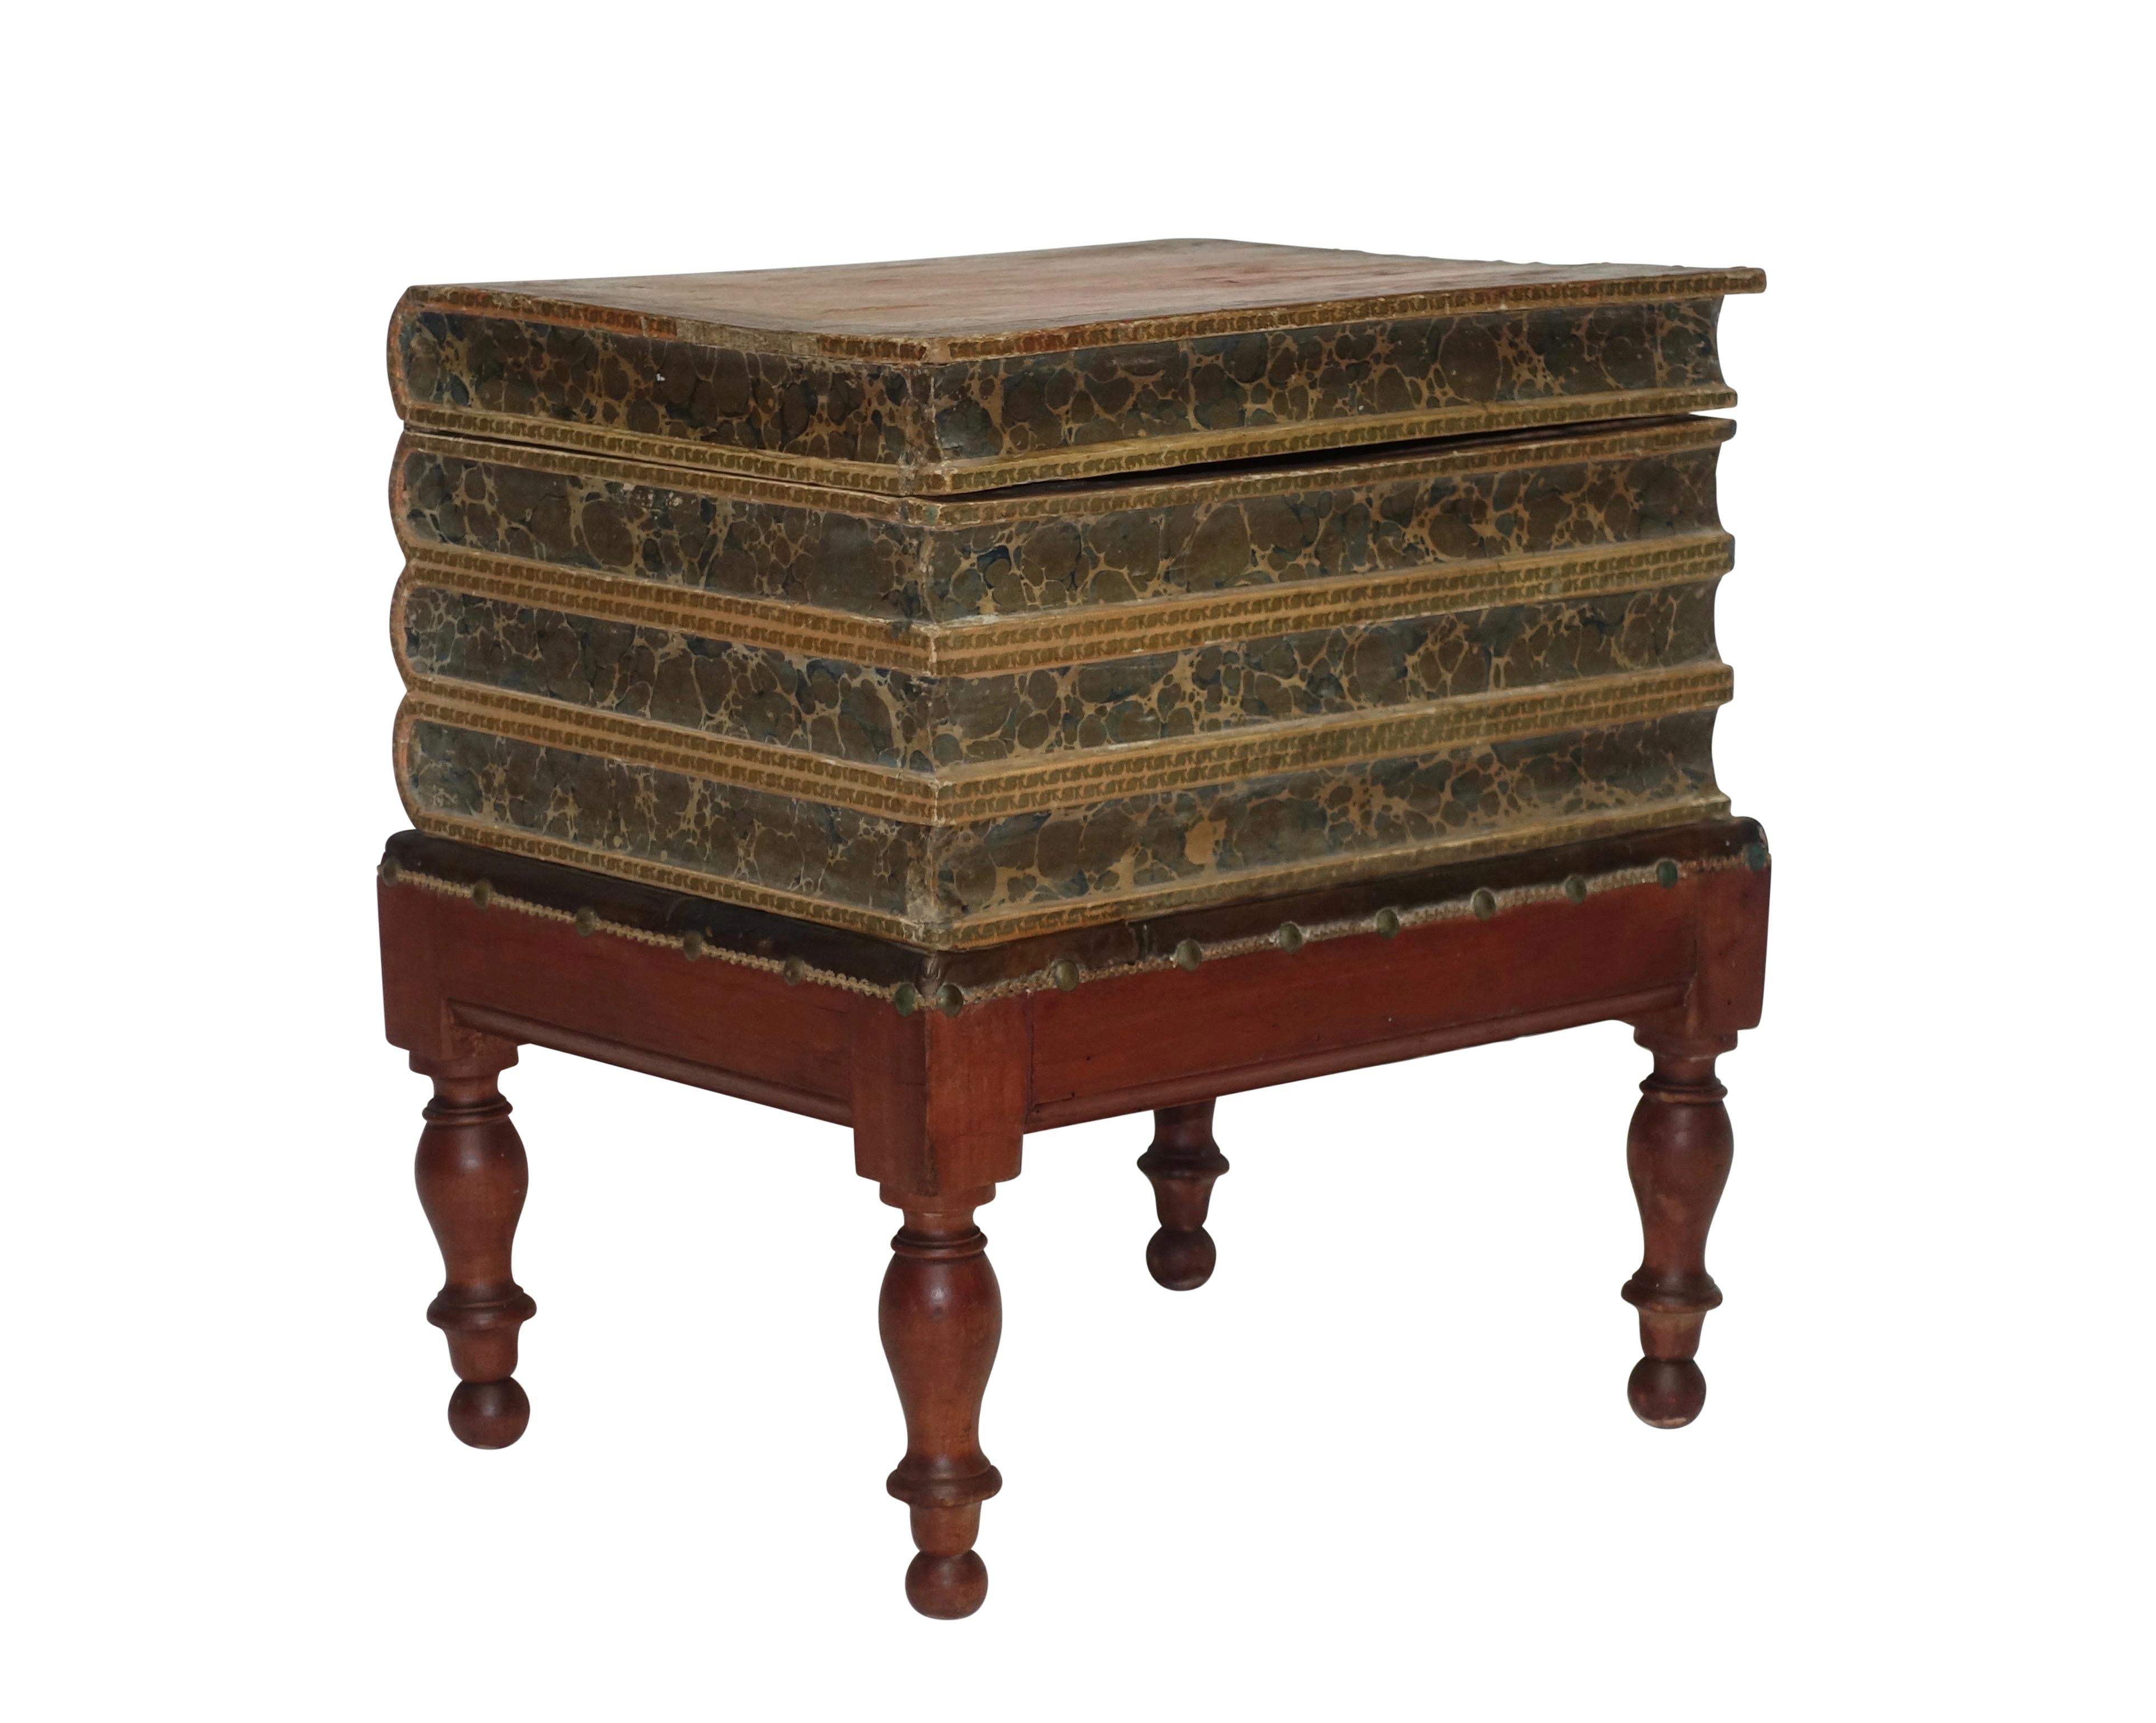 Leather four volume faux book box on painted pine stand with turned legs. Interior of the box lined with Italian marbleized paper and having a small lidded compartment within. England, early to mid-19th century.